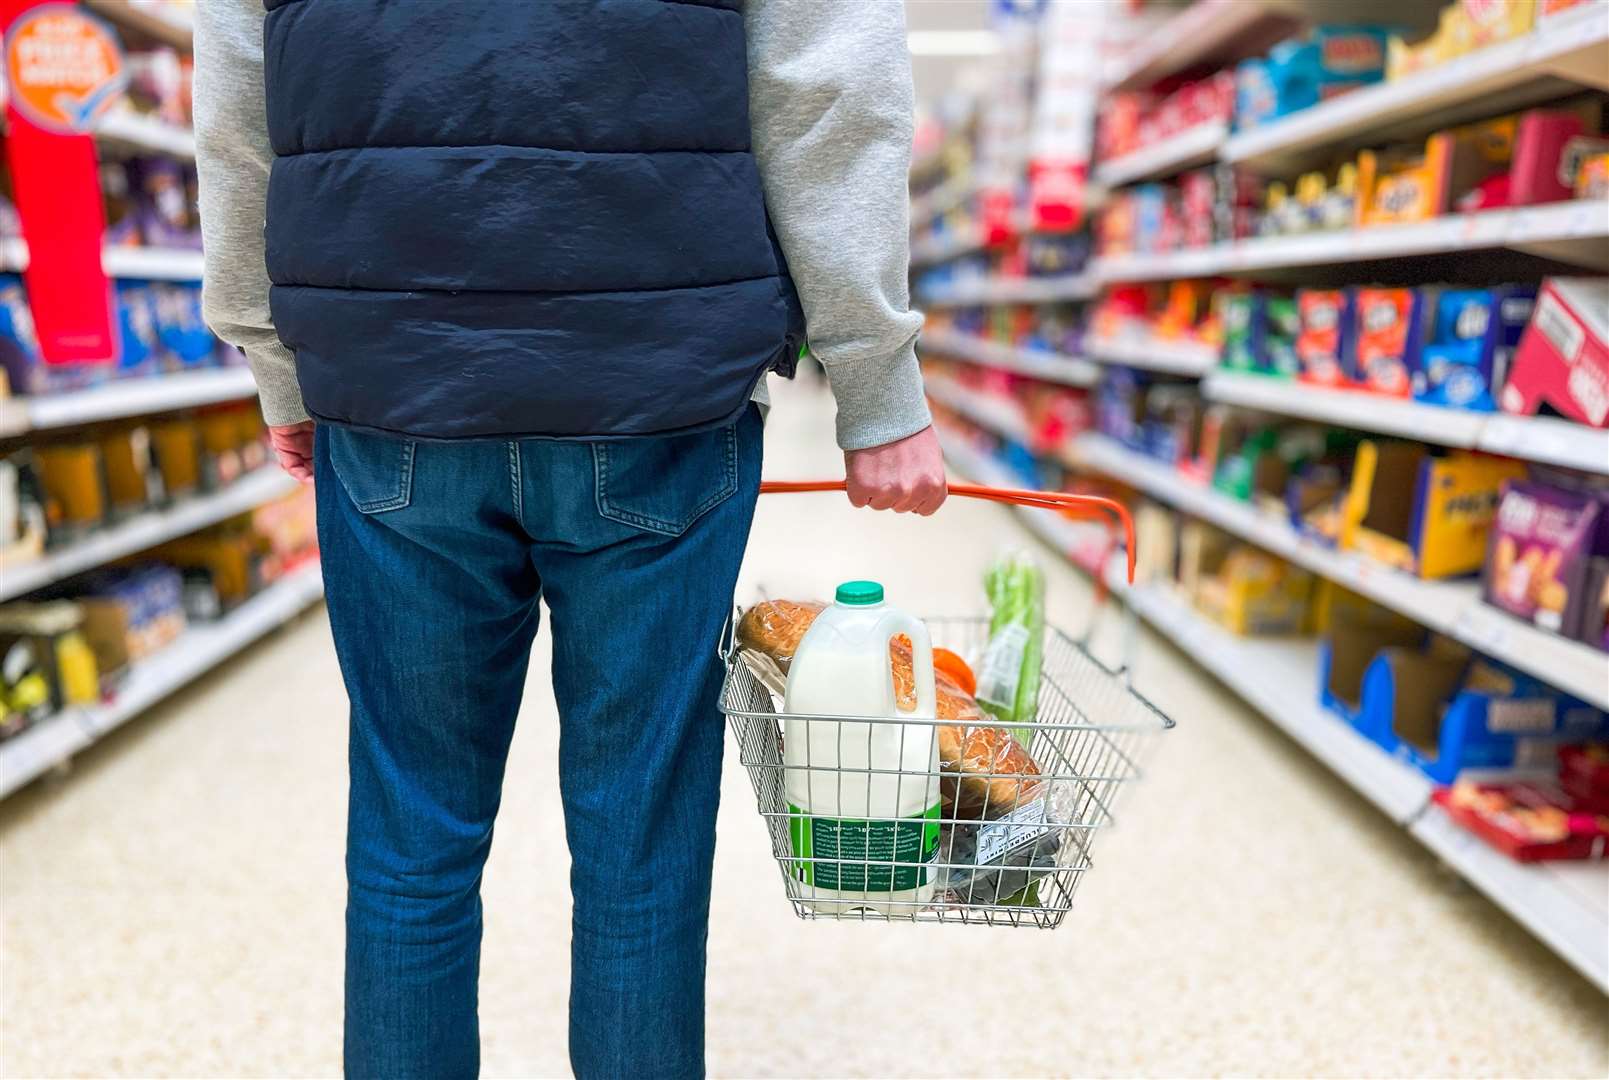 Are self-checkouts the root case of all shoplifting in supermarkets? Image: iStock.